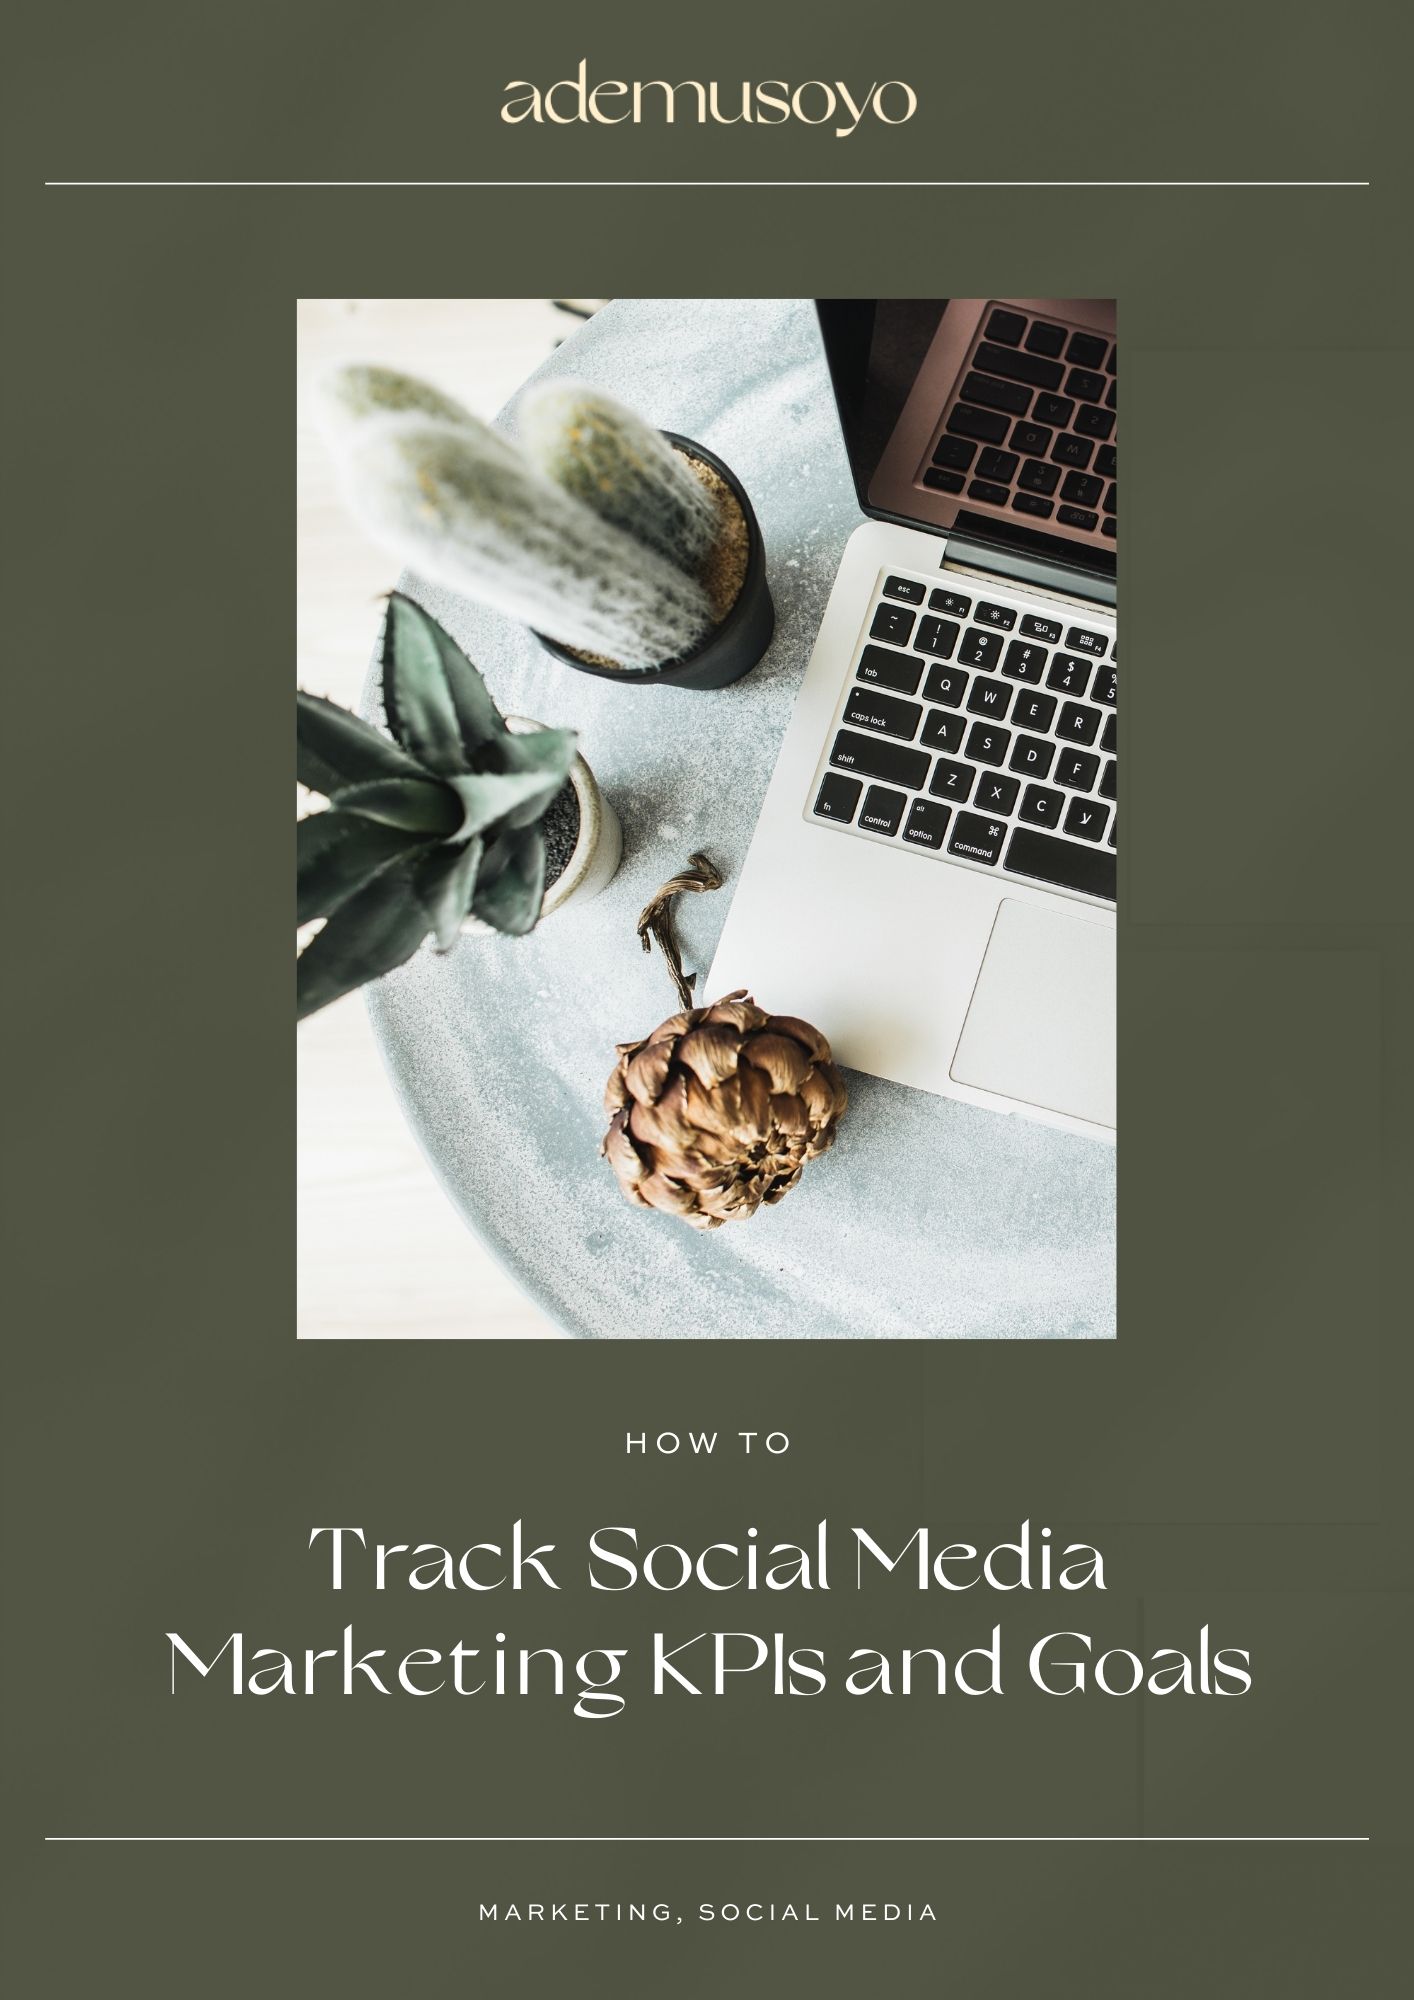 how to track social media marketing kpis and goals, social media tips, digital marketing tips